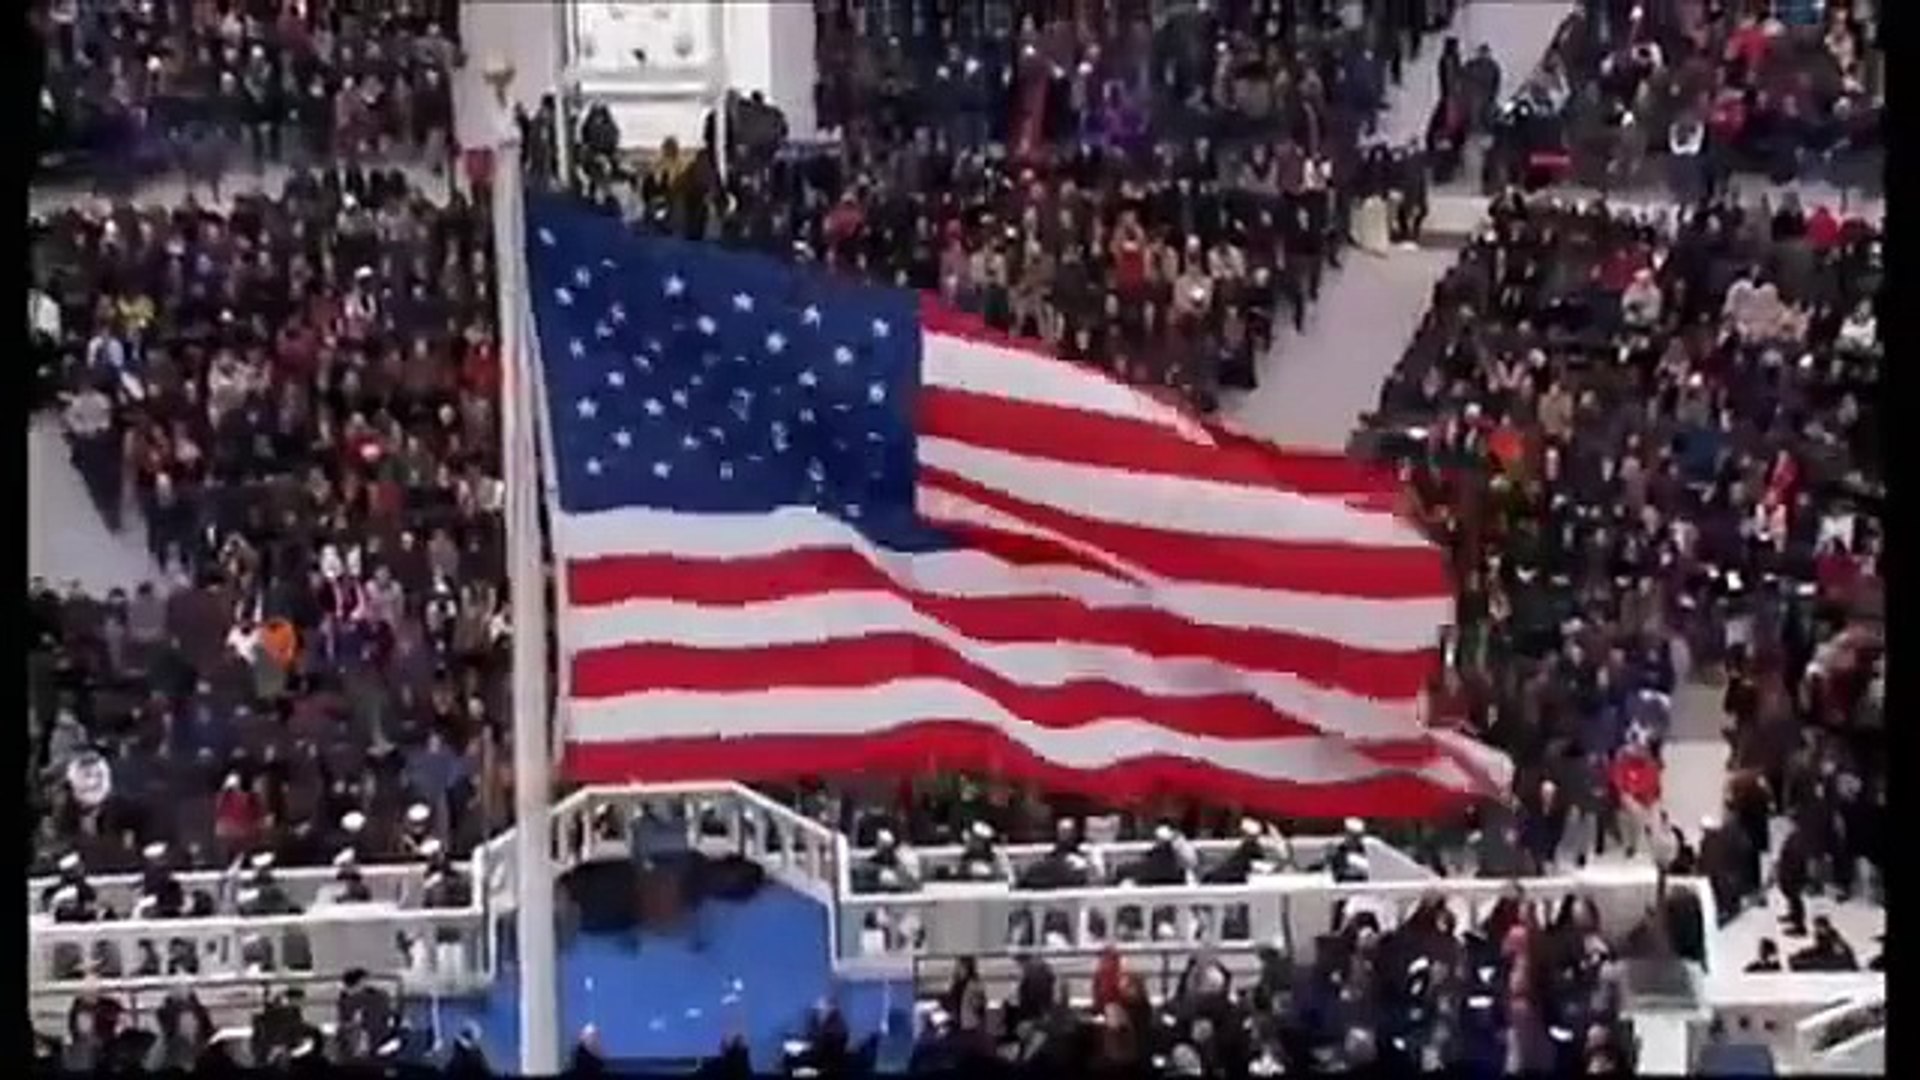 ⁣BEYONCE NATIONAL ANTHEM 2013 - BEYONCE OBAMA 2013 - BEYONCE SINGS AT INAUGURAION CEREMONY, PRESIDENT